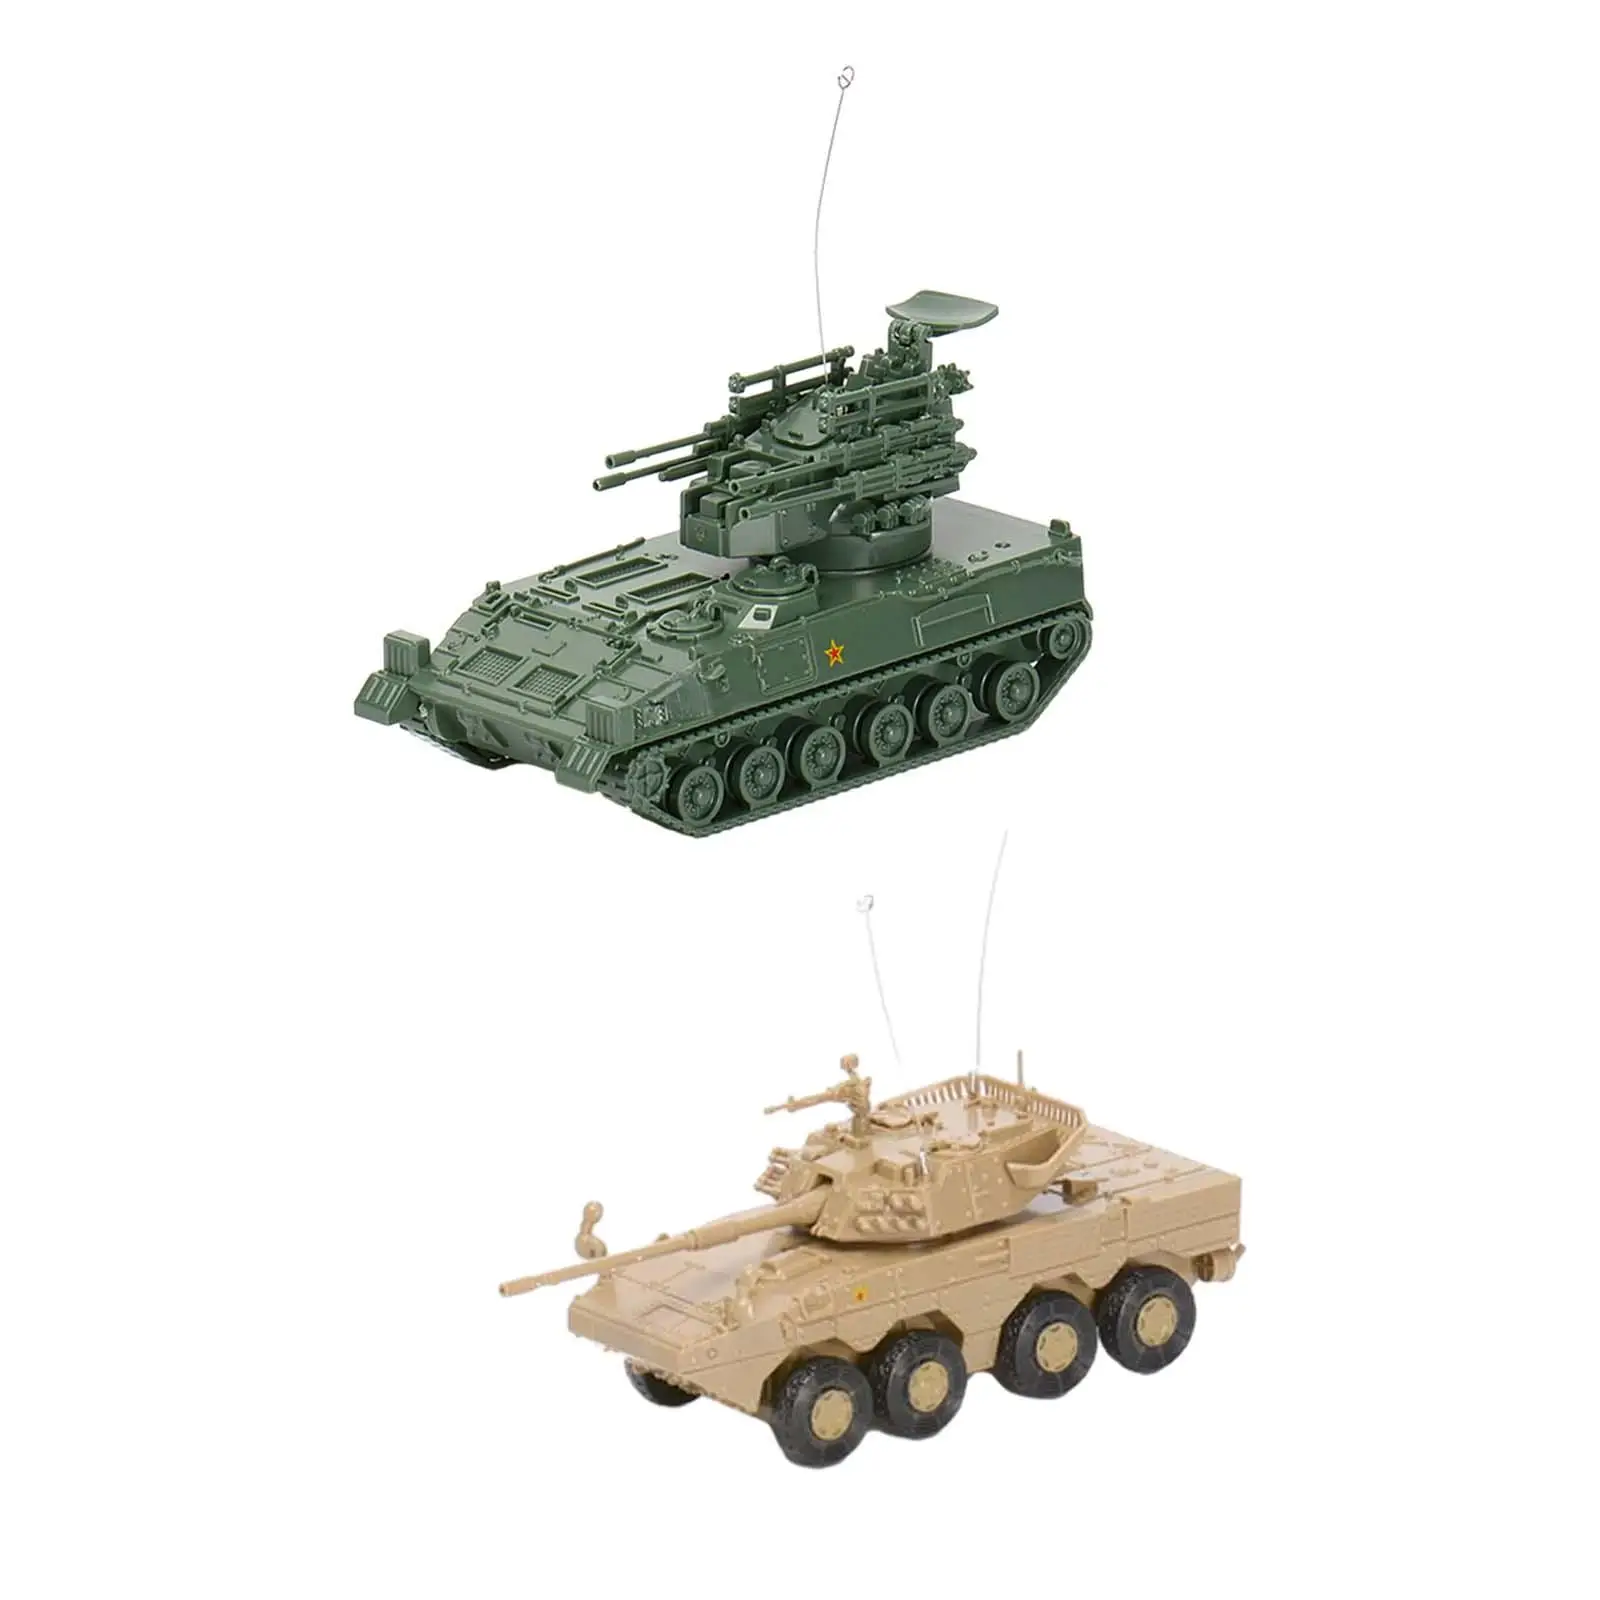 2x 1:72 Scale 4D Tank Model Armored Vehicle Tank Model Puzzle DIY Assemble for Girls Boy Tabletop Decor Children Birthday Gift